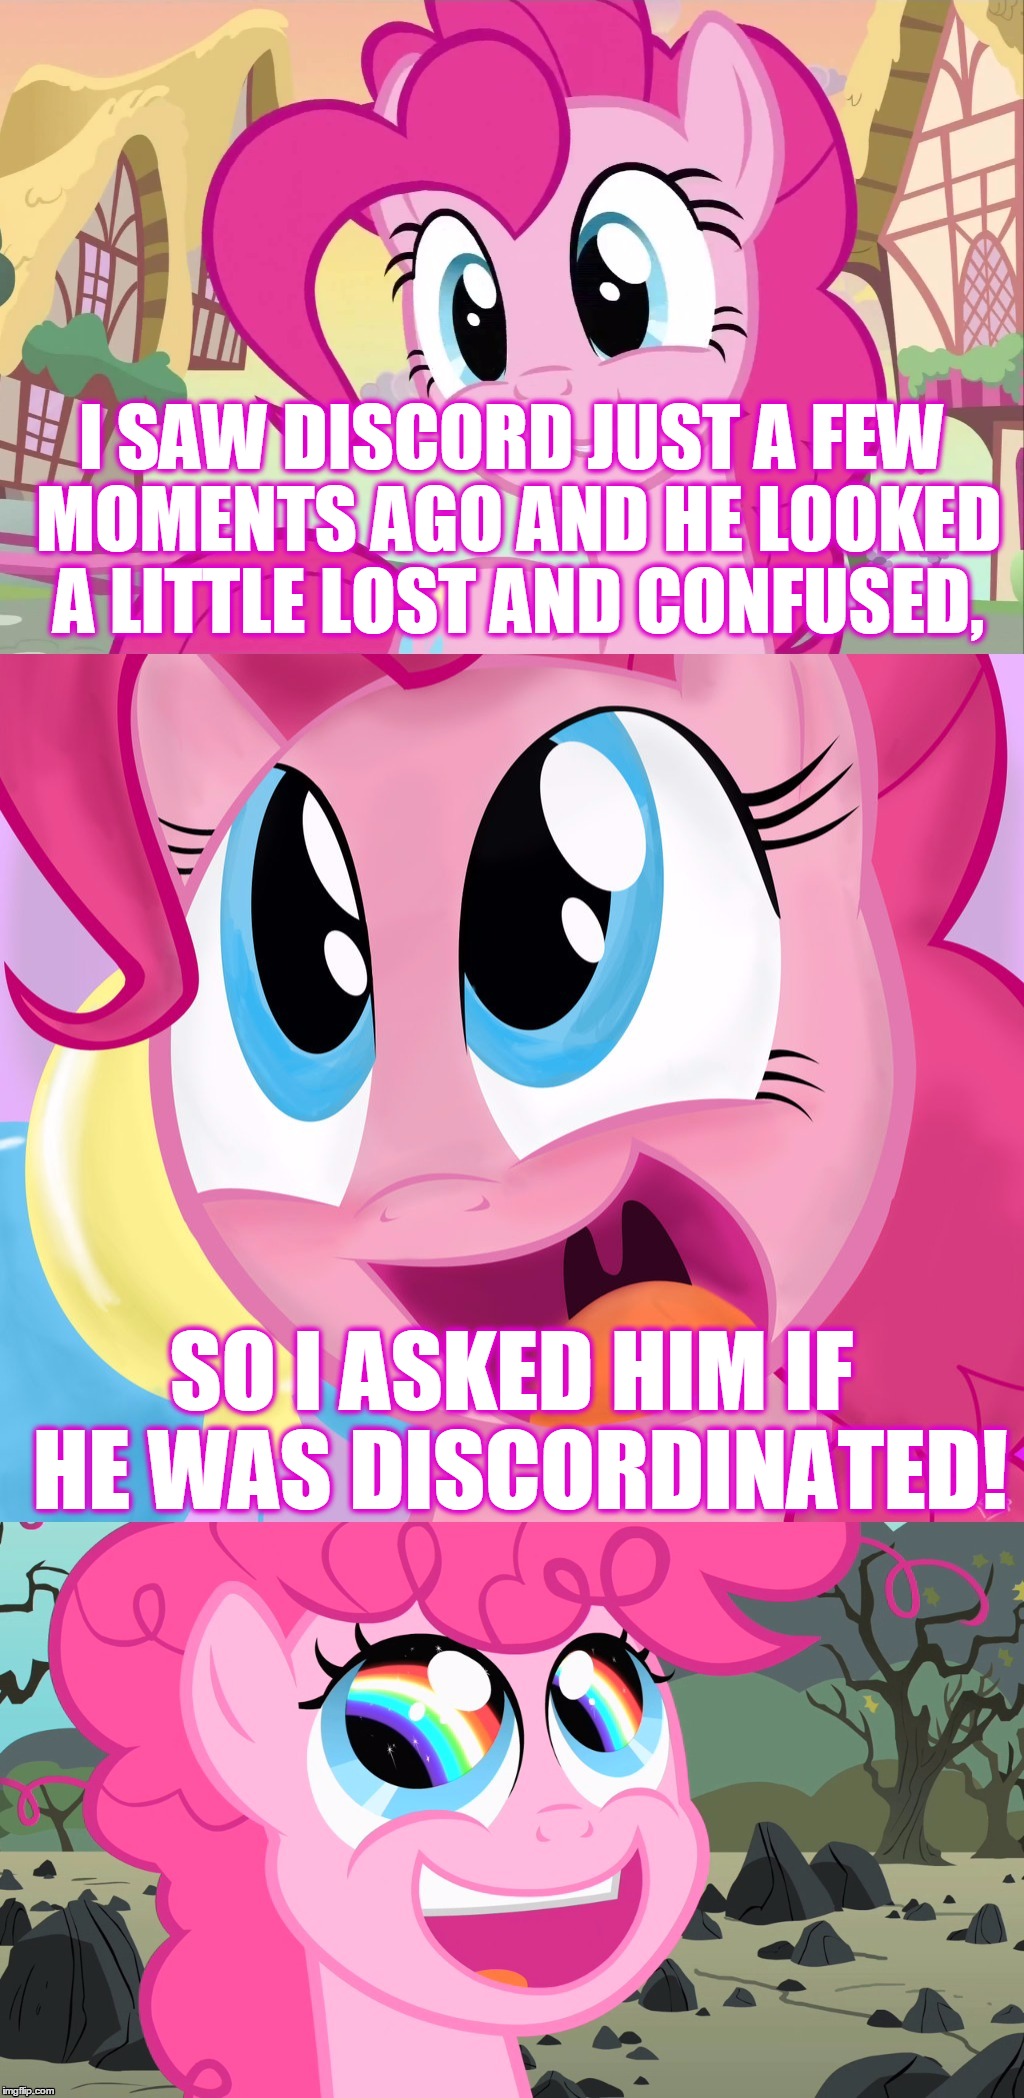 Bad Pun Pinkie Pie | I SAW DISCORD JUST A FEW MOMENTS AGO AND HE LOOKED A LITTLE LOST AND CONFUSED, SO I ASKED HIM IF HE WAS DISCORDINATED! | image tagged in bad pun pinkie pie,memes,bad pun,mlp,my little pony,pinkie pie | made w/ Imgflip meme maker